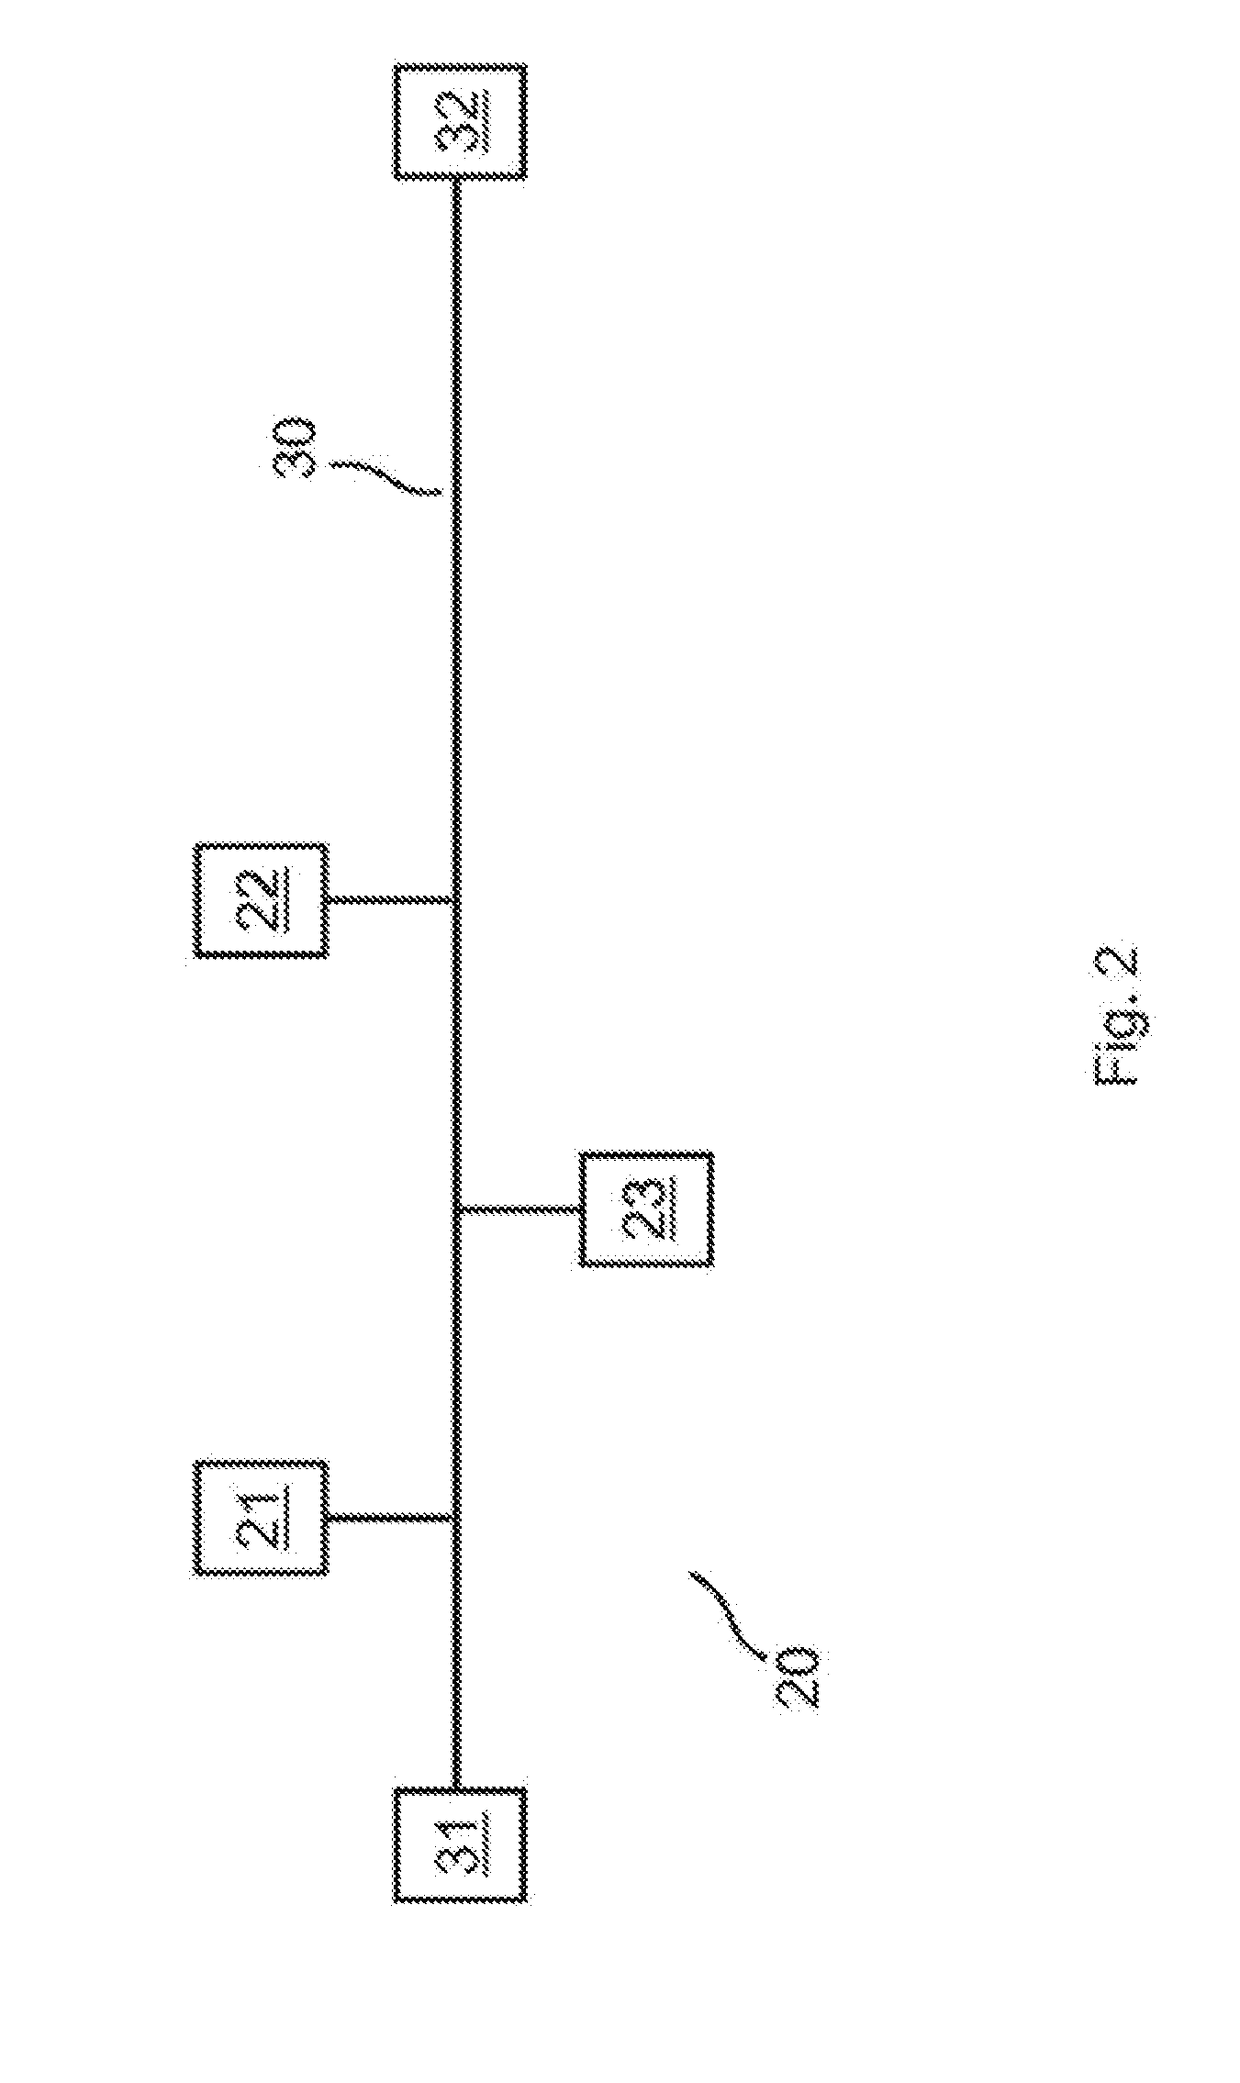 Method for Generating a Secret or a Key in a Network